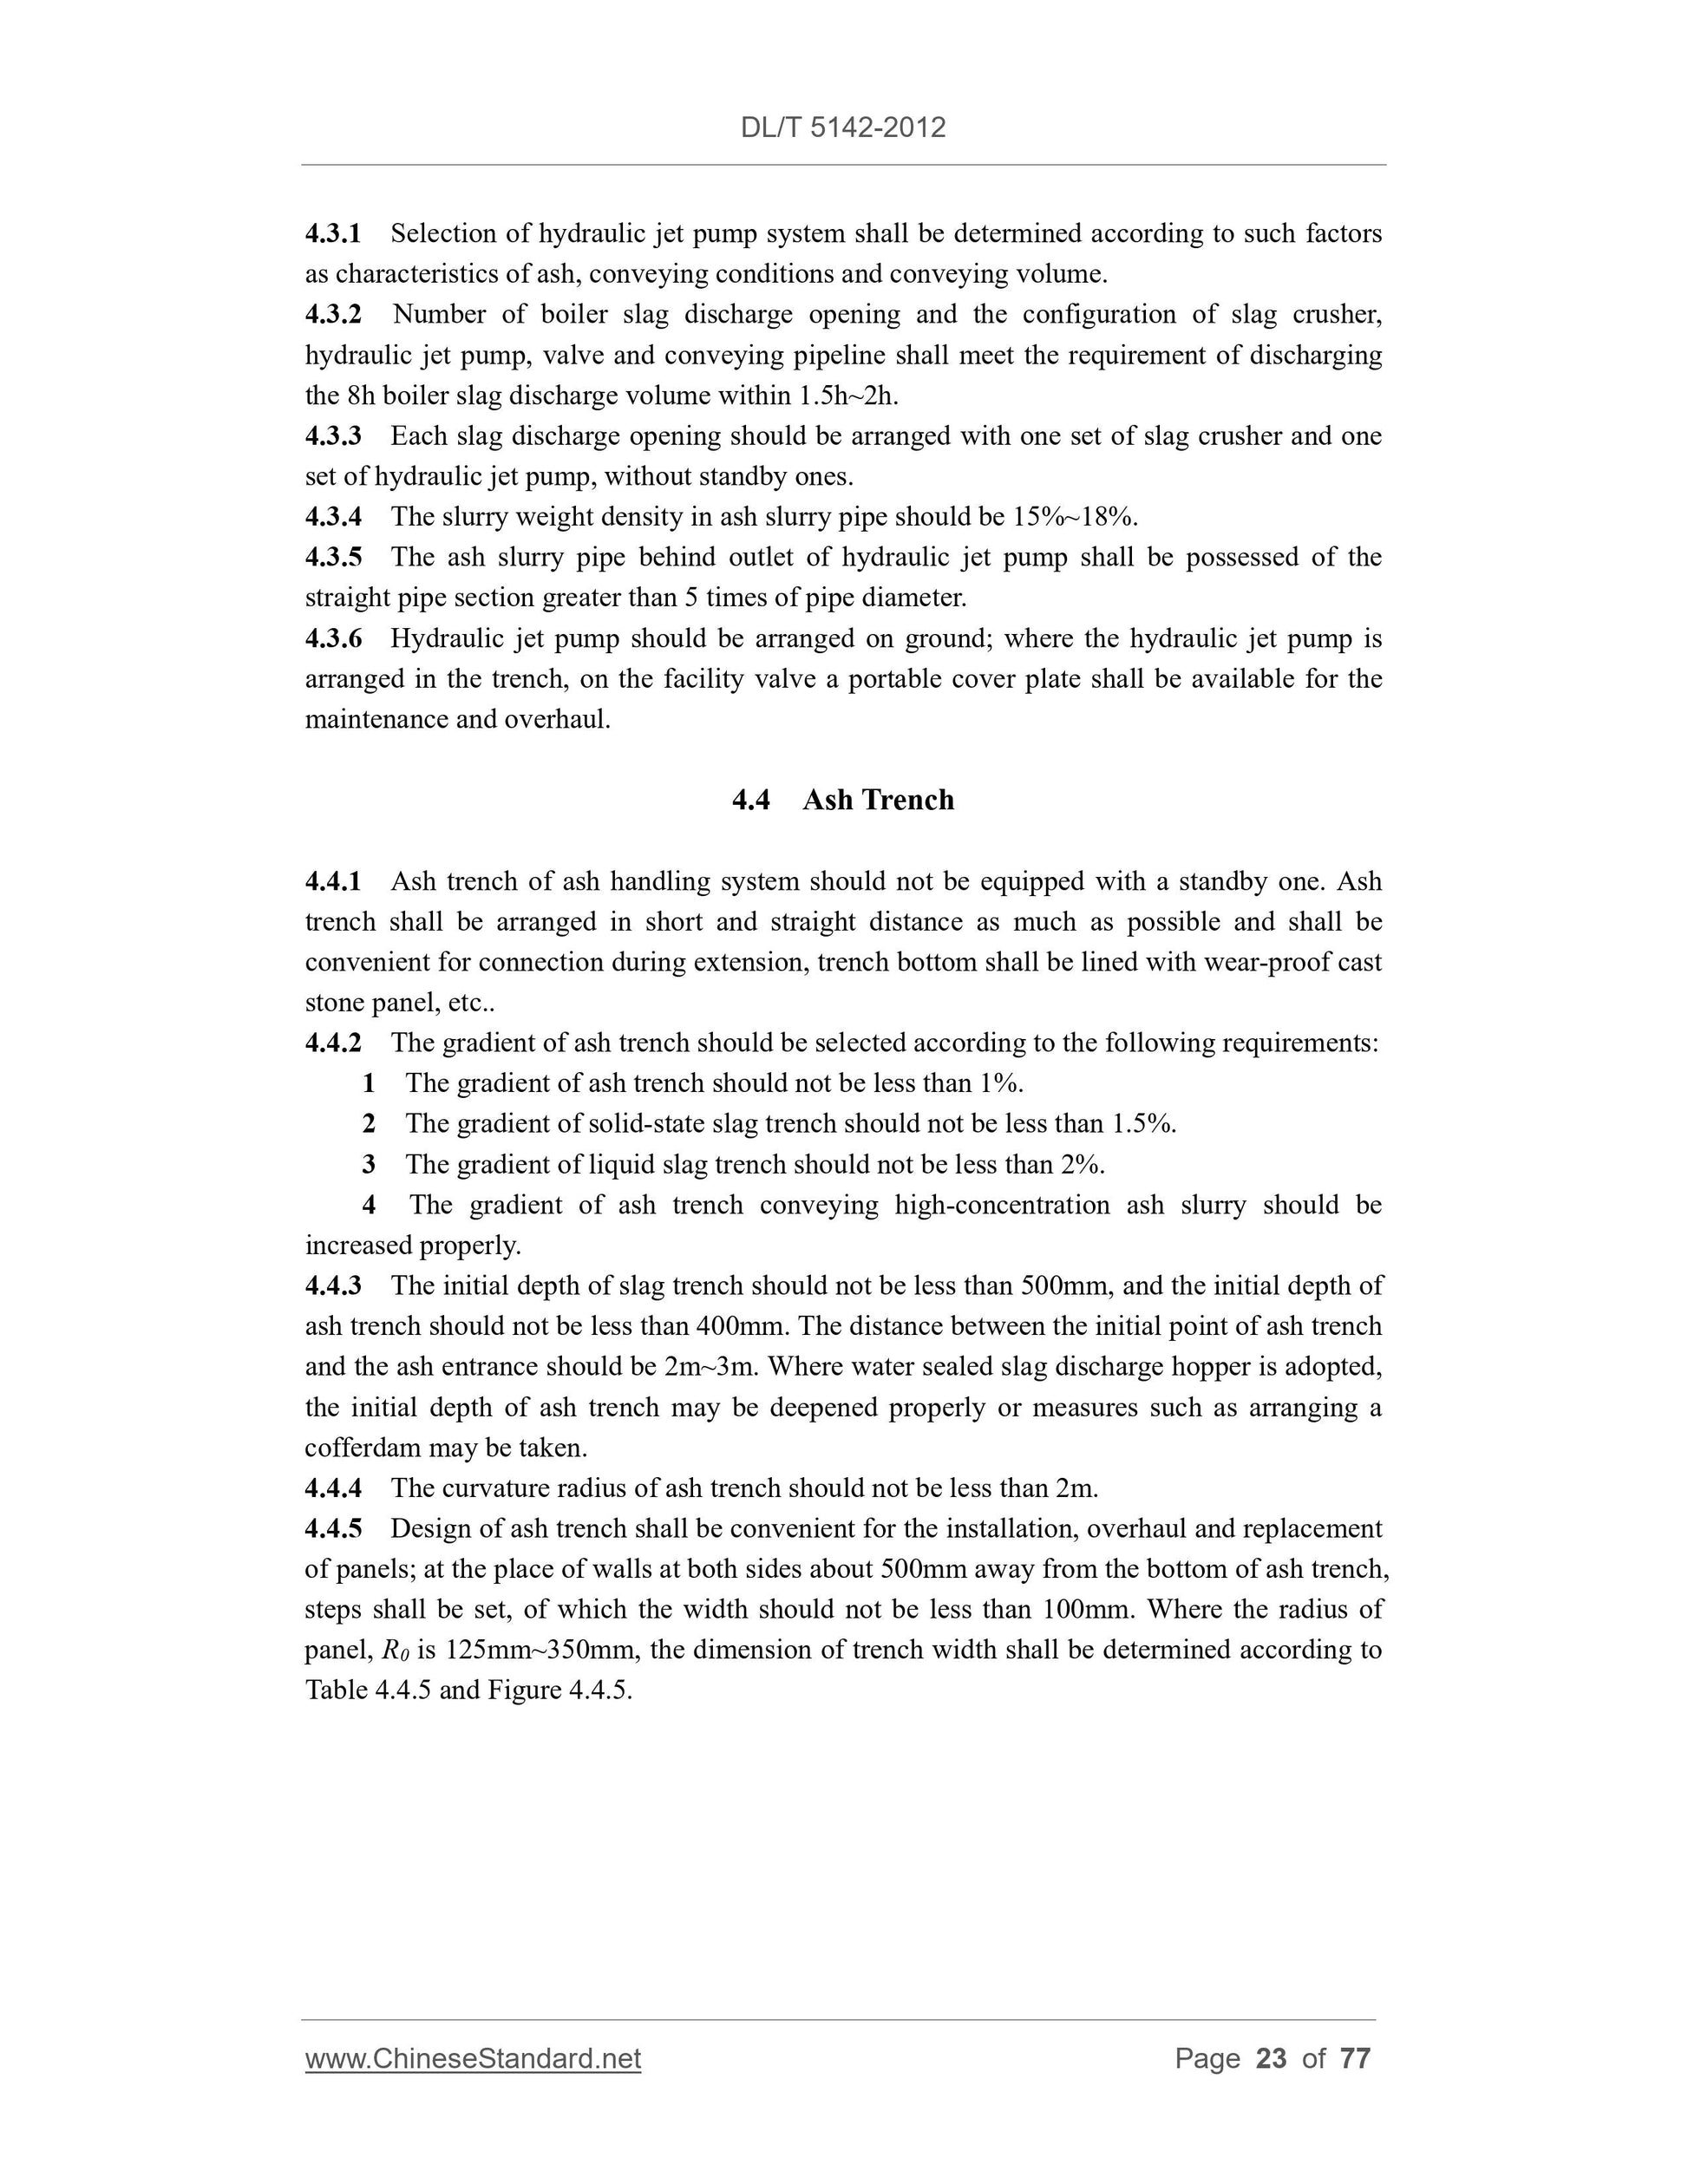 DL/T 5142-2012 Page 10